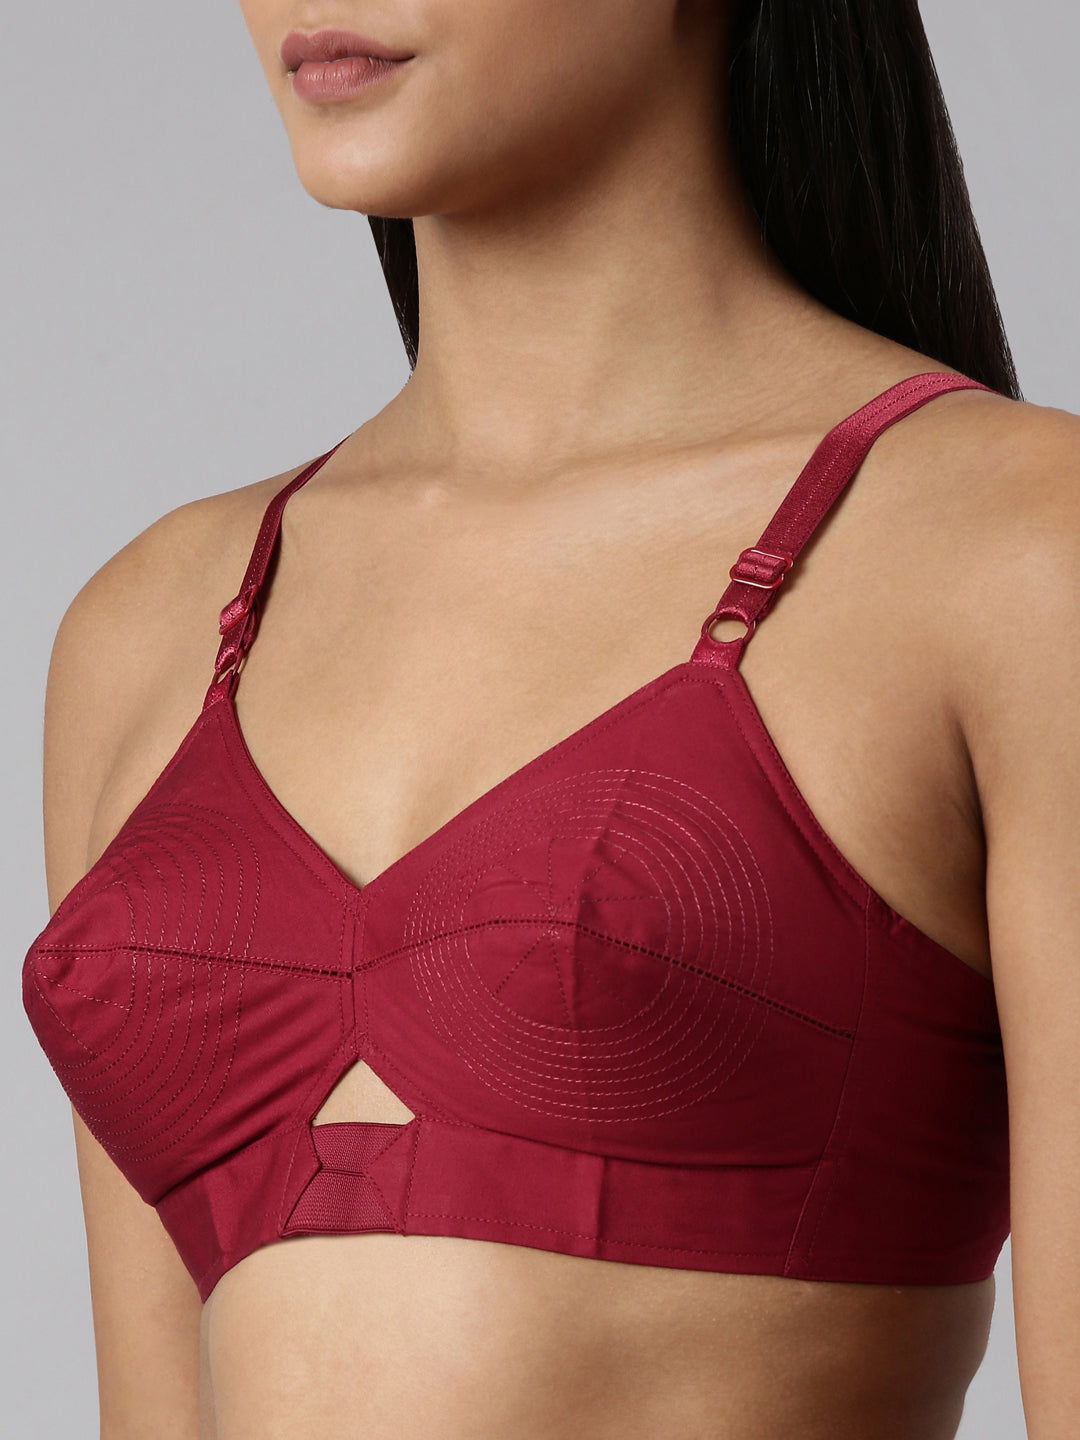 blossom-authentic bra-B Cup-maroon2-Woven cotton-everyday bra